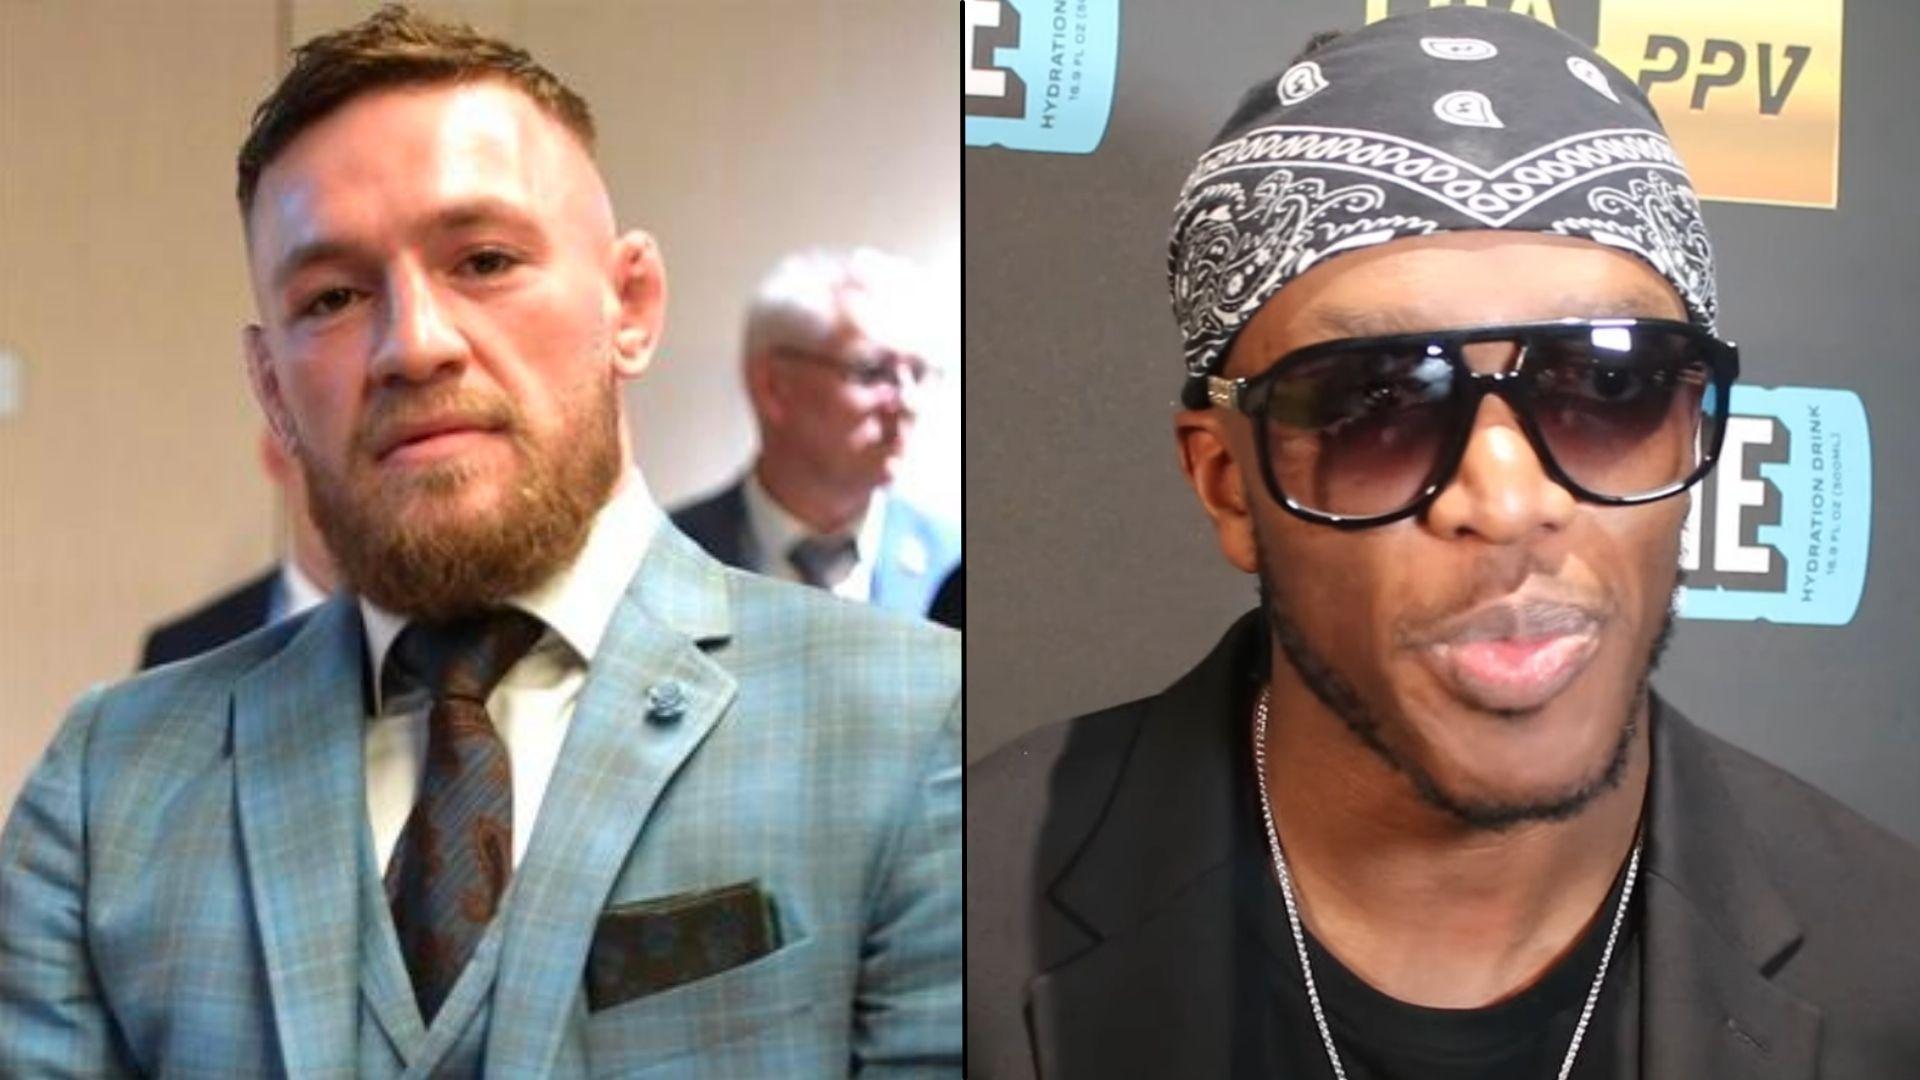 KSI and Conor McGregor side-by-side wearing suits